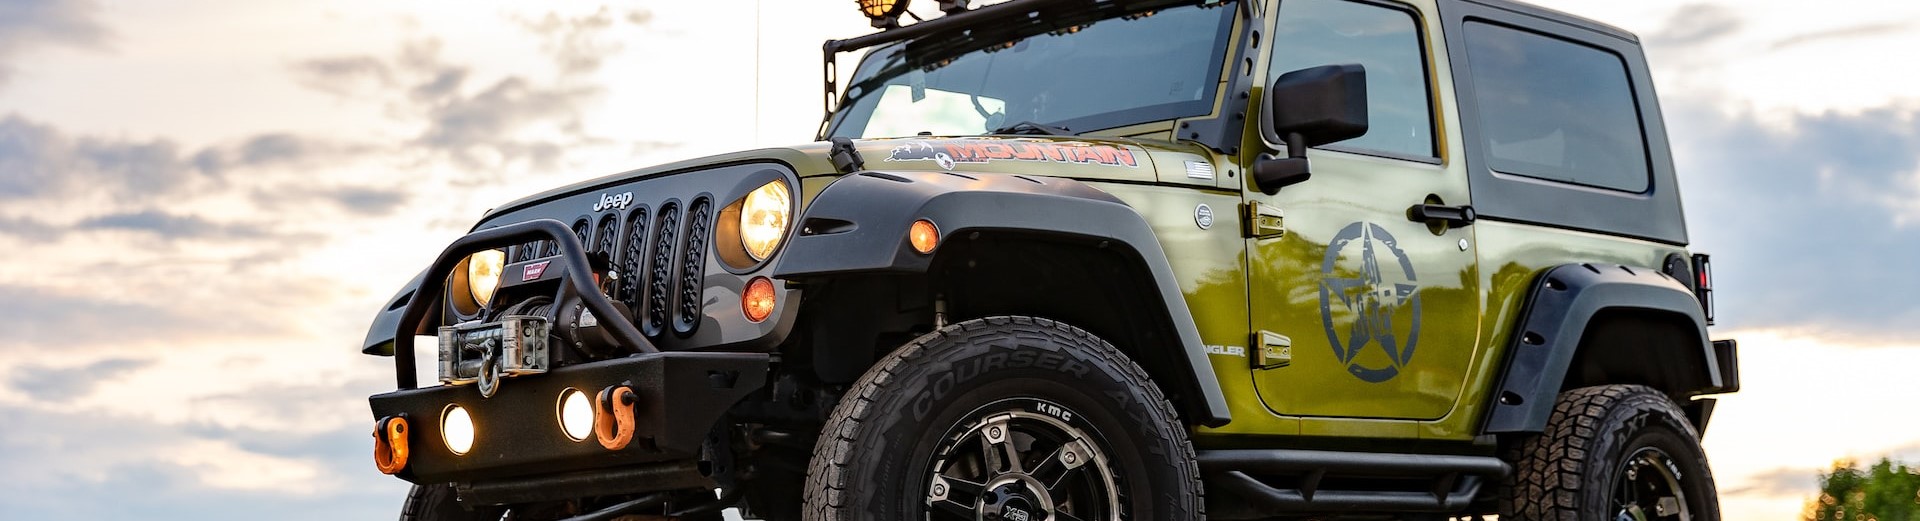 Green and Black Wrangler | Breast Cancer Car Donations